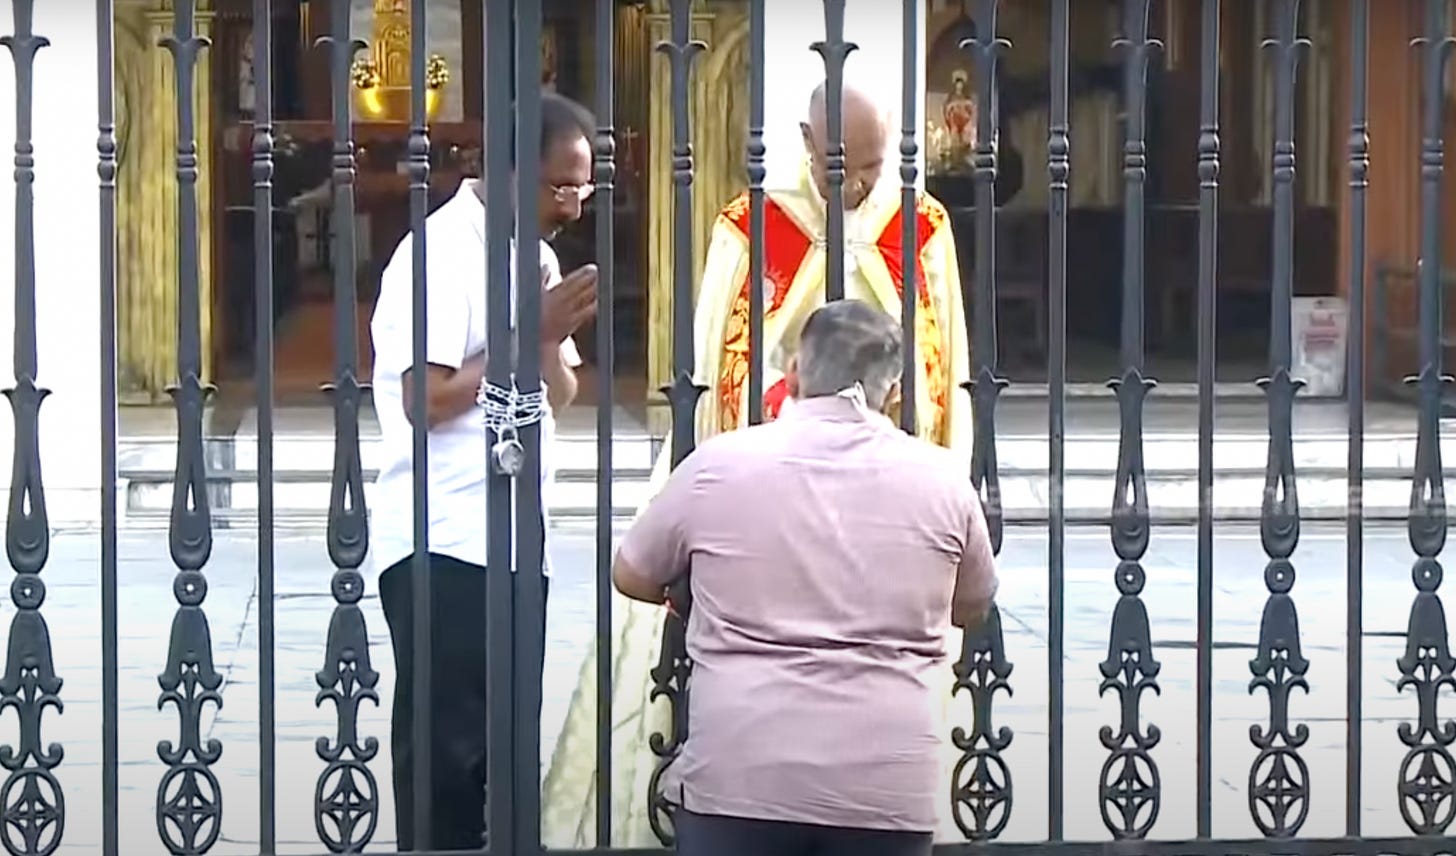 Indian archbishop blocked from entering cathedral amid liturgy dispute